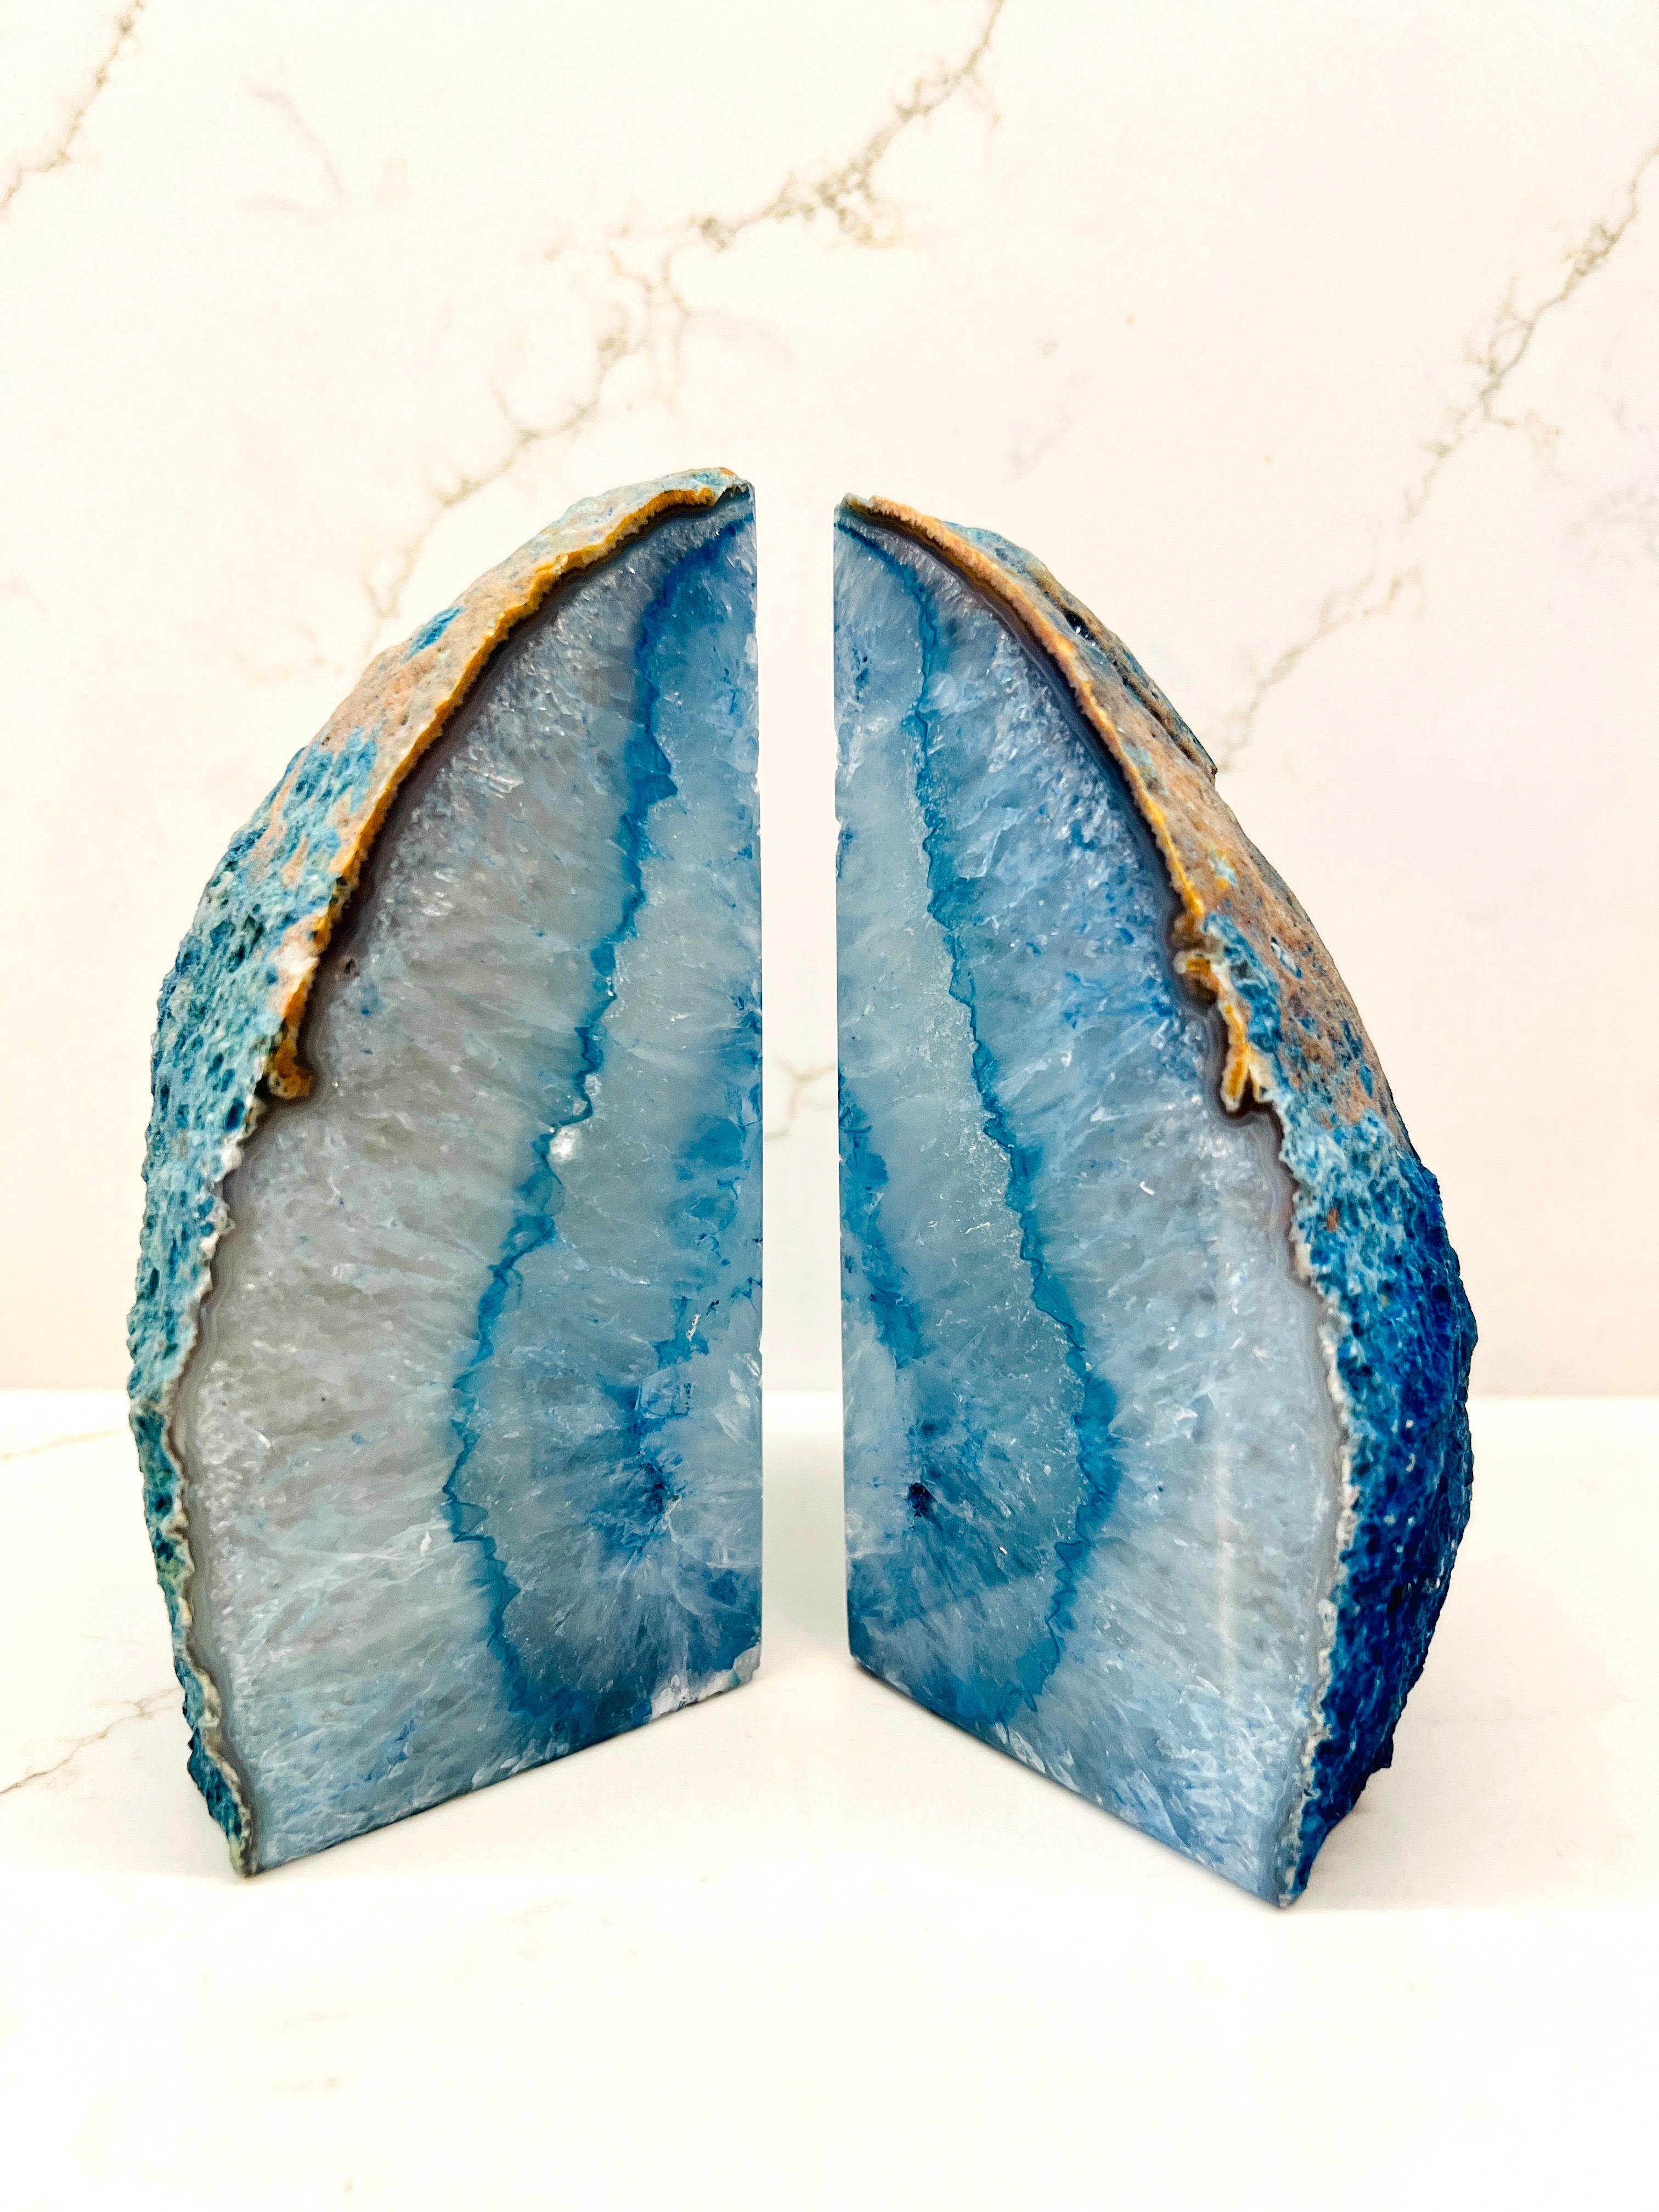 Organic Modern Pair of Quartz Crystal Geode Bookends in Blue and White For Sale